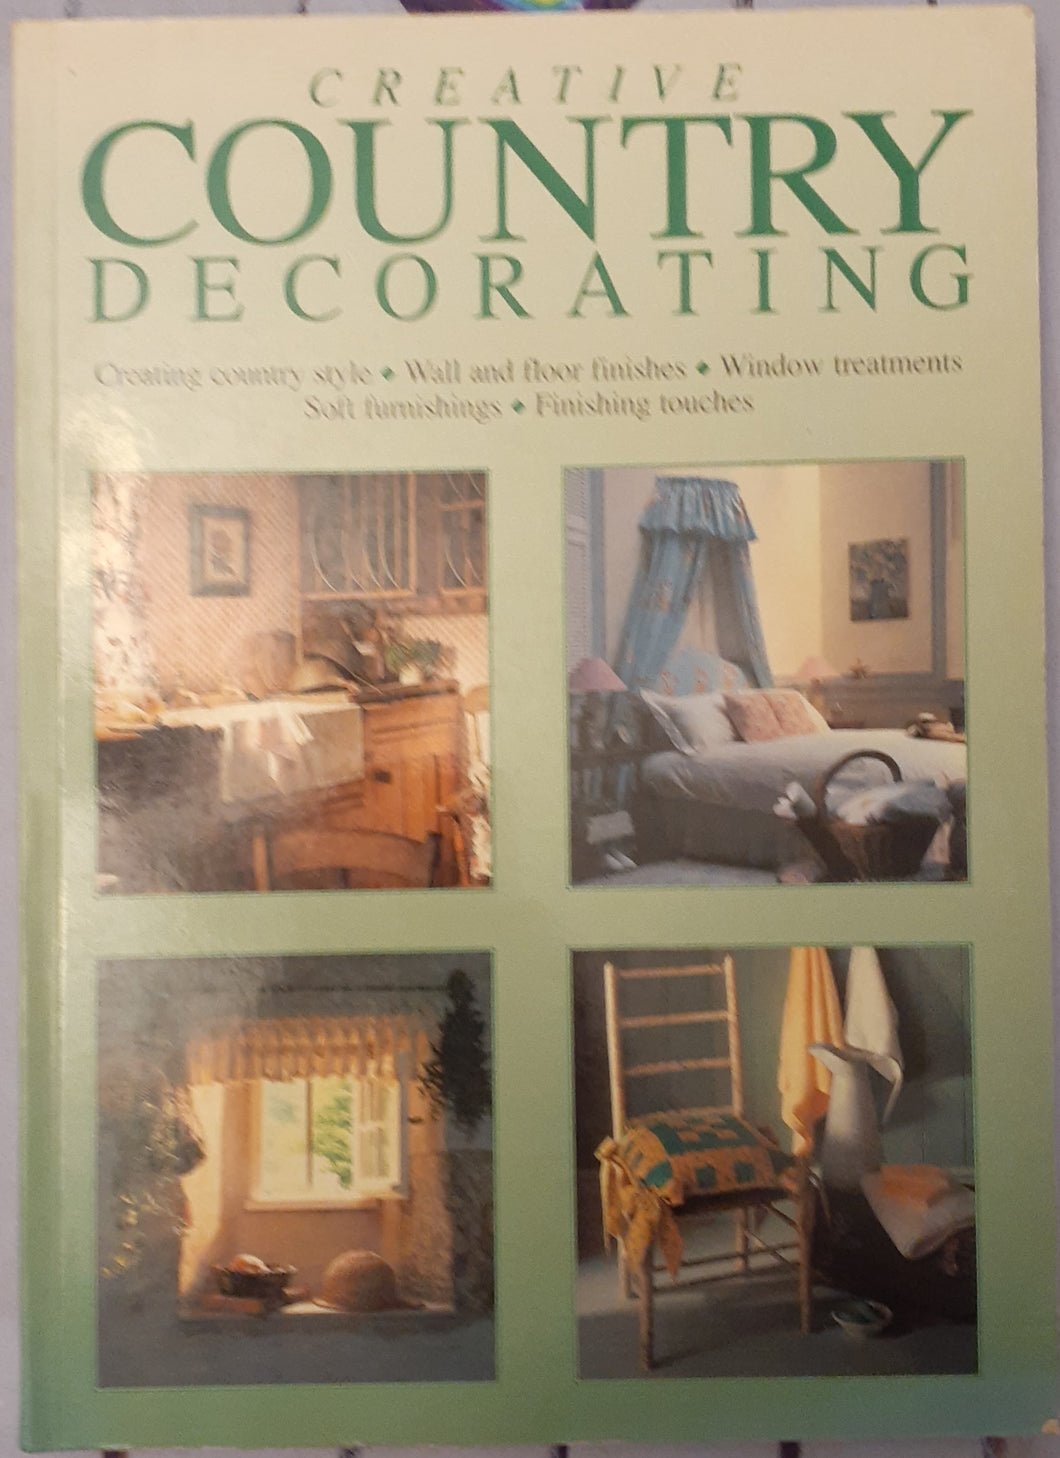 Creative Country Decorating